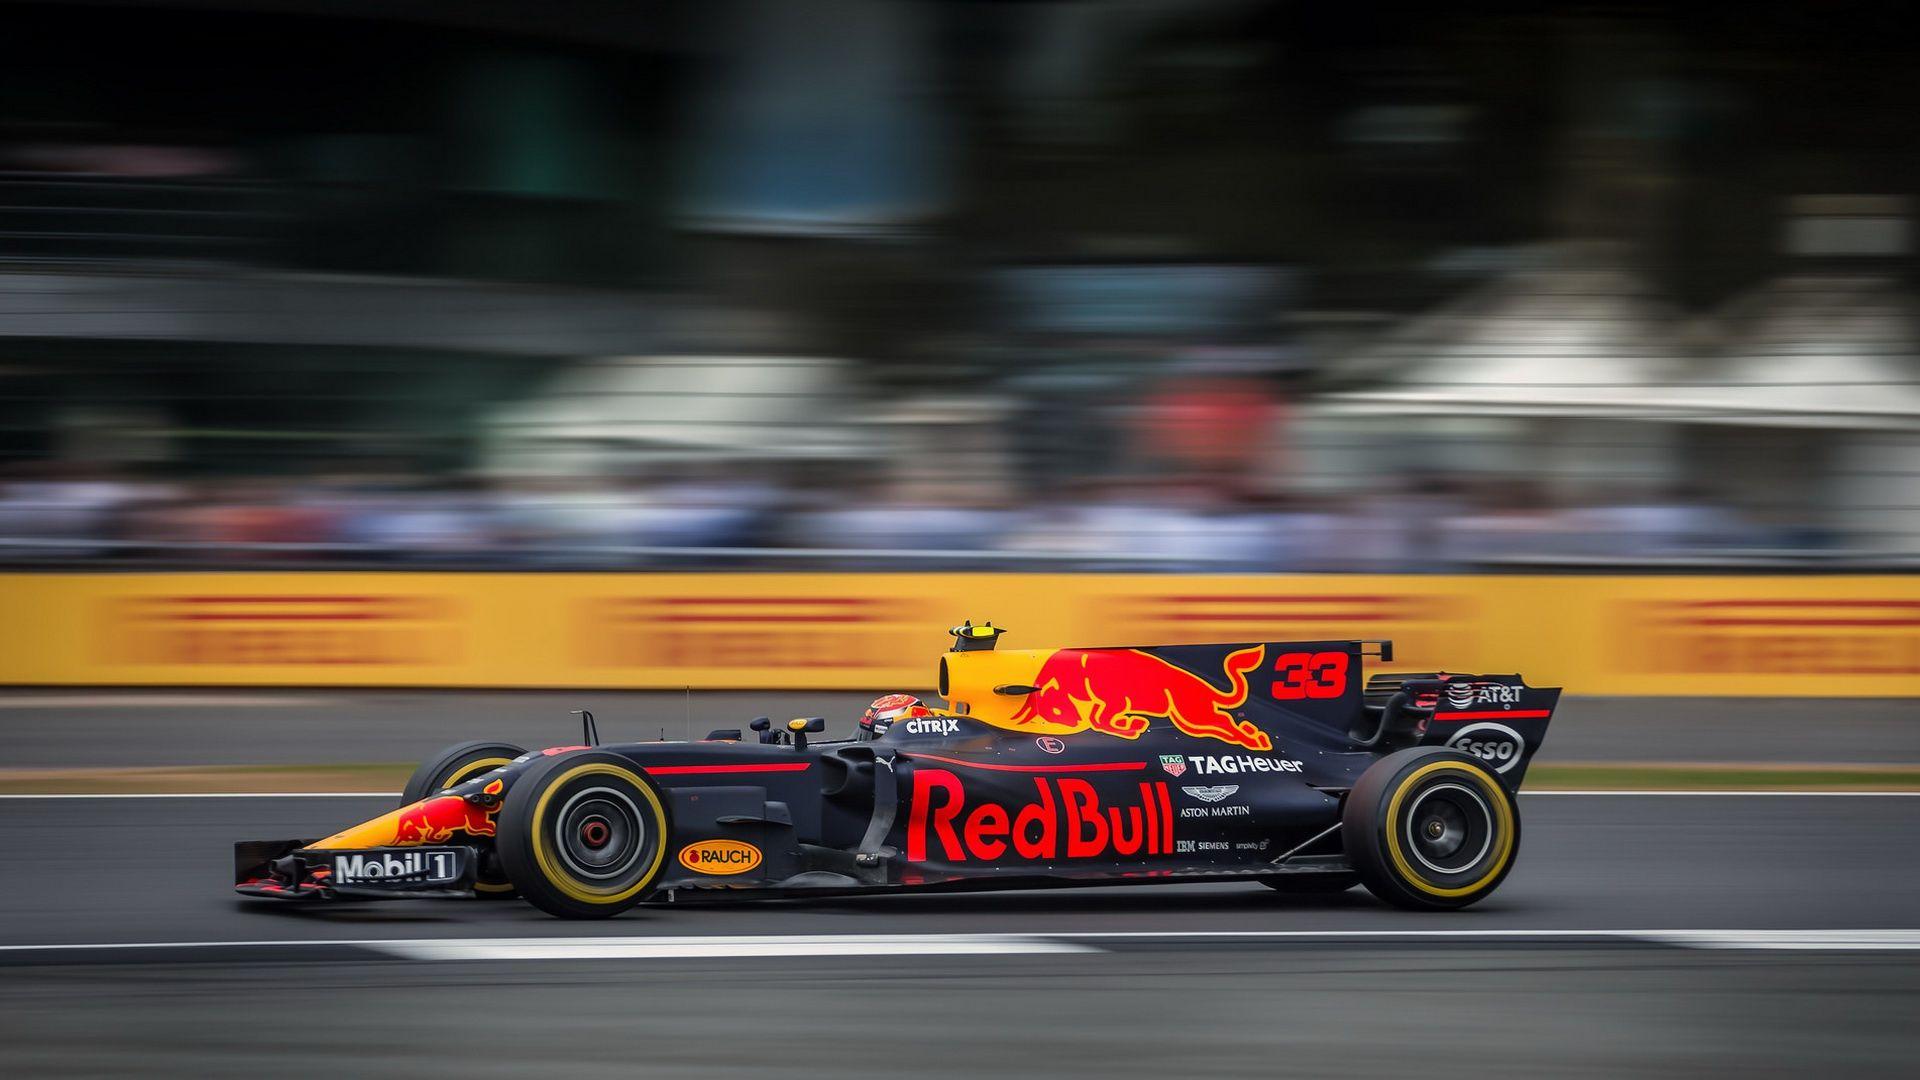 download red bull f1 2016 for free